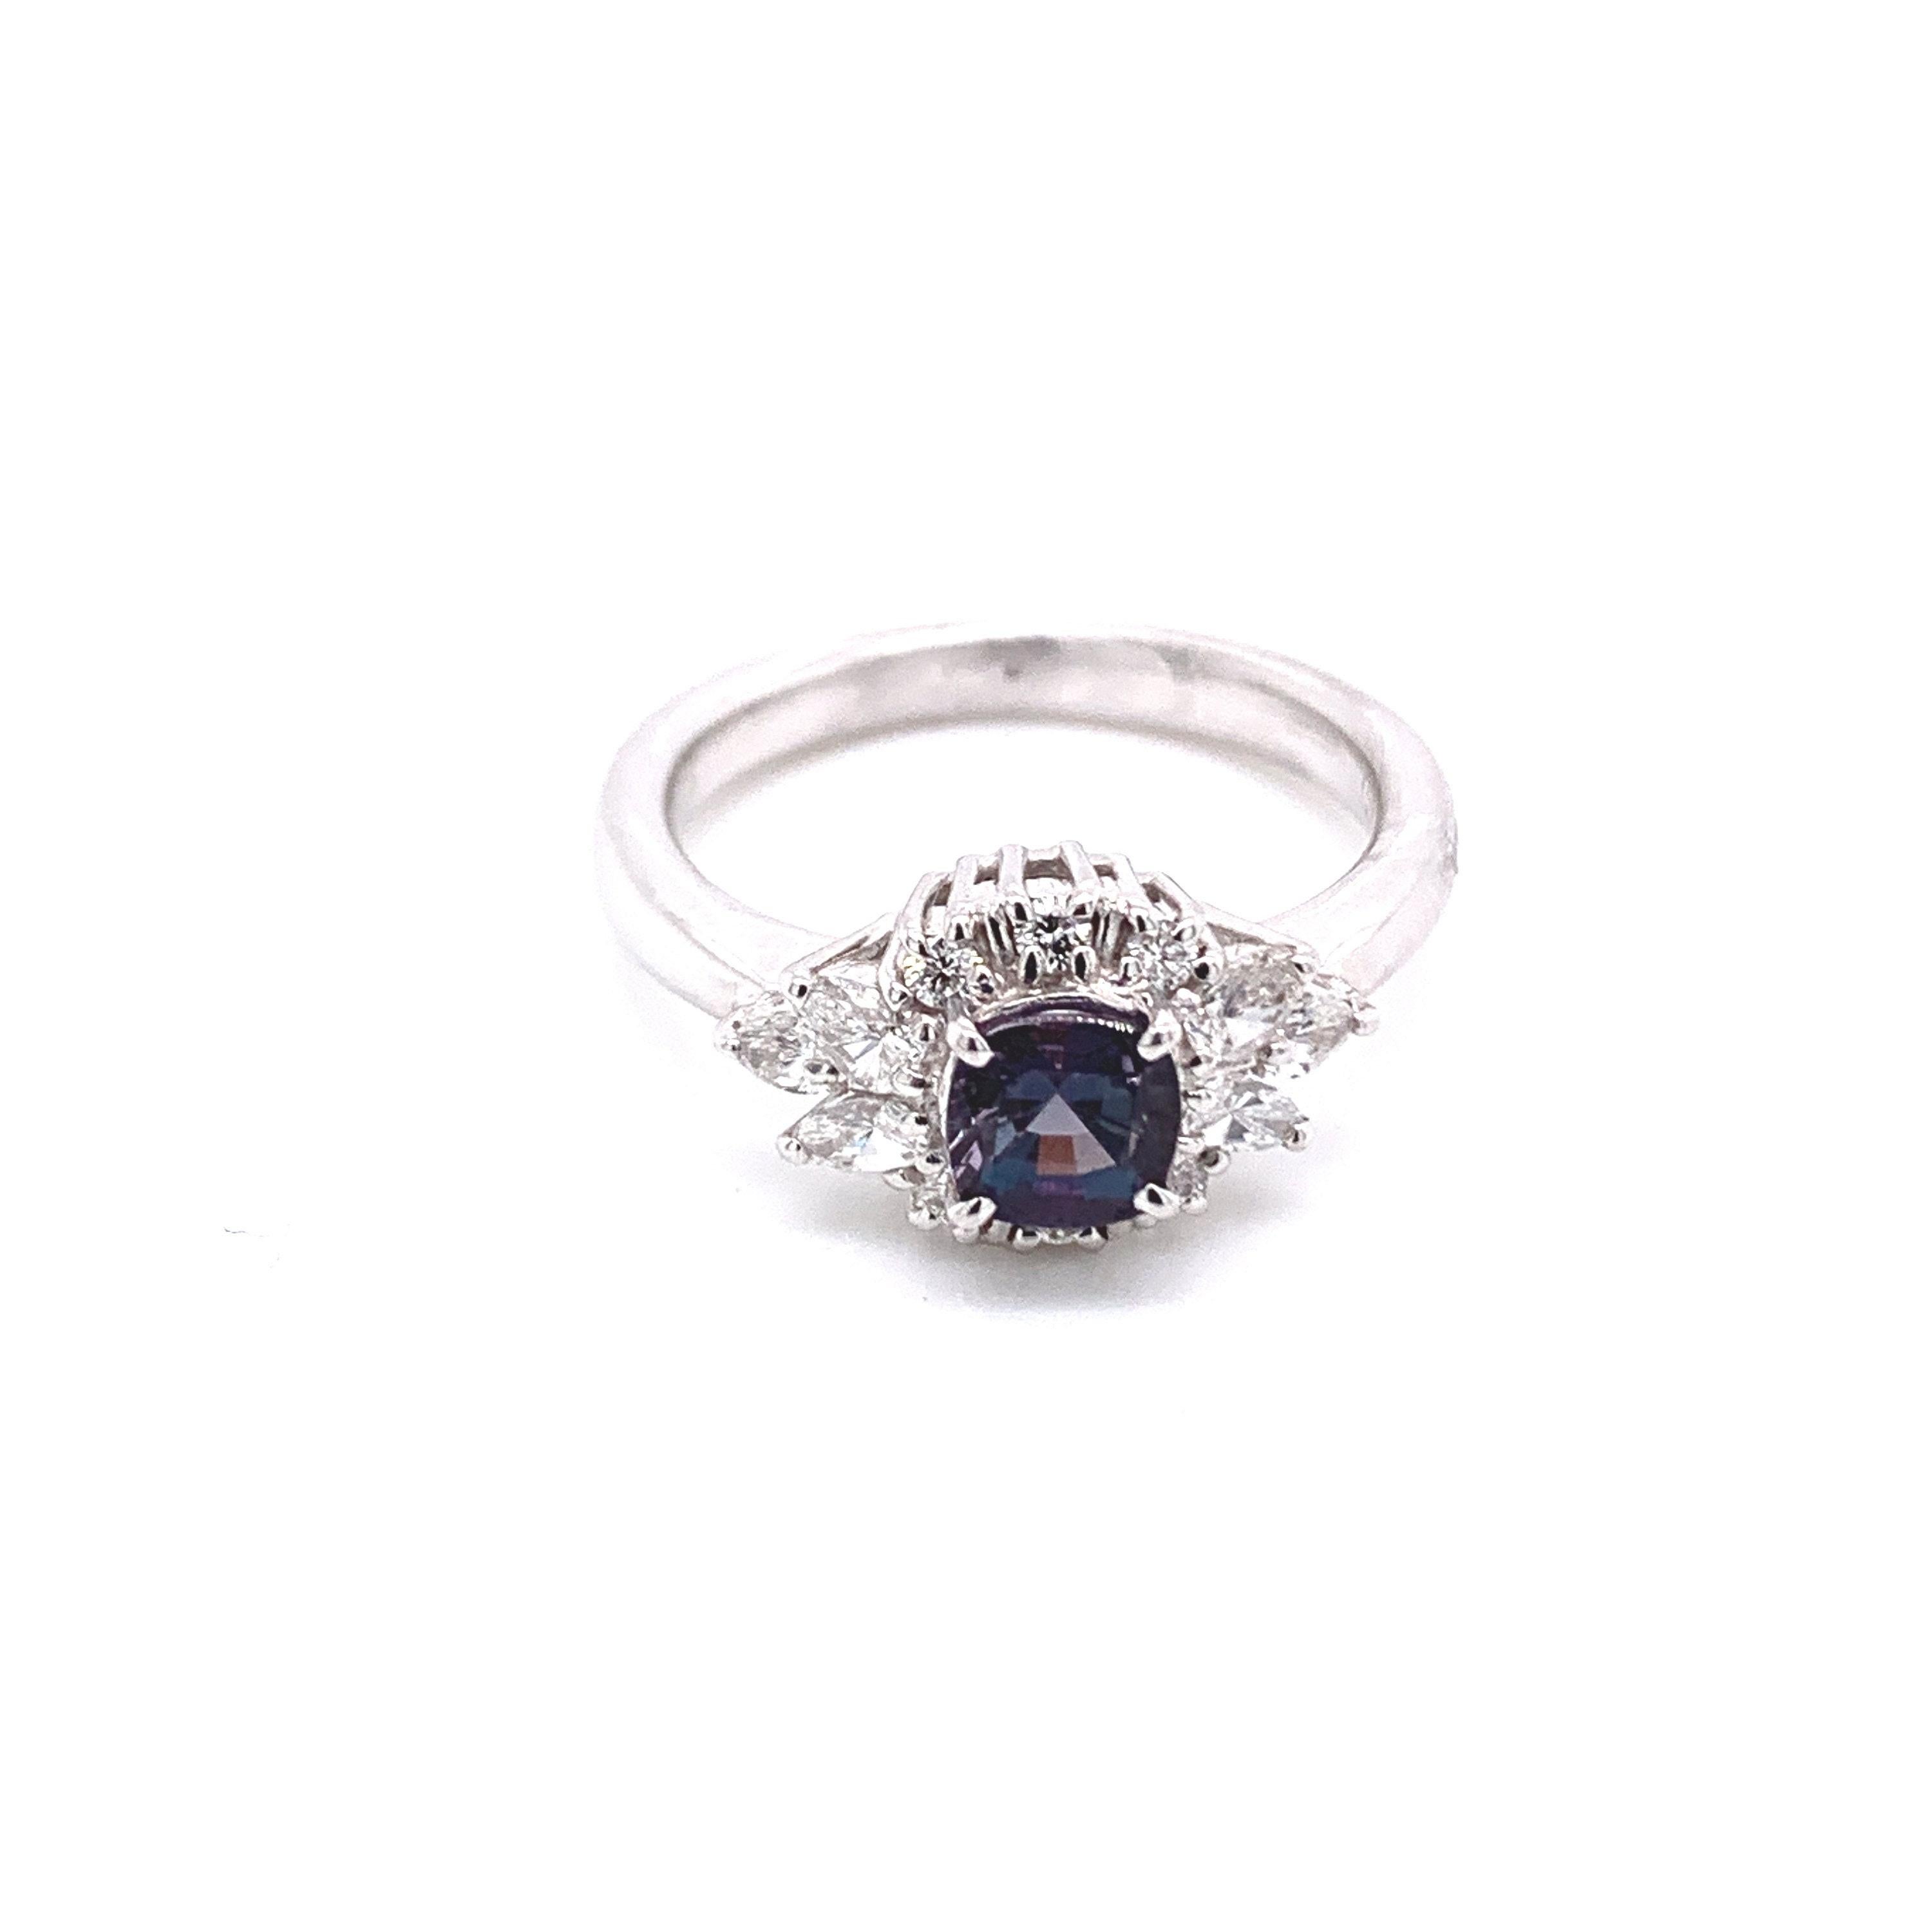 This is a gorgeous natural AAA quality cushion Alexandrite surrounded by a dainty diamond halo that is set in a vintage platinum setting. This ring features a natural 0.68 alexandrite that is certified by the Gemological Institute of America (GIA)